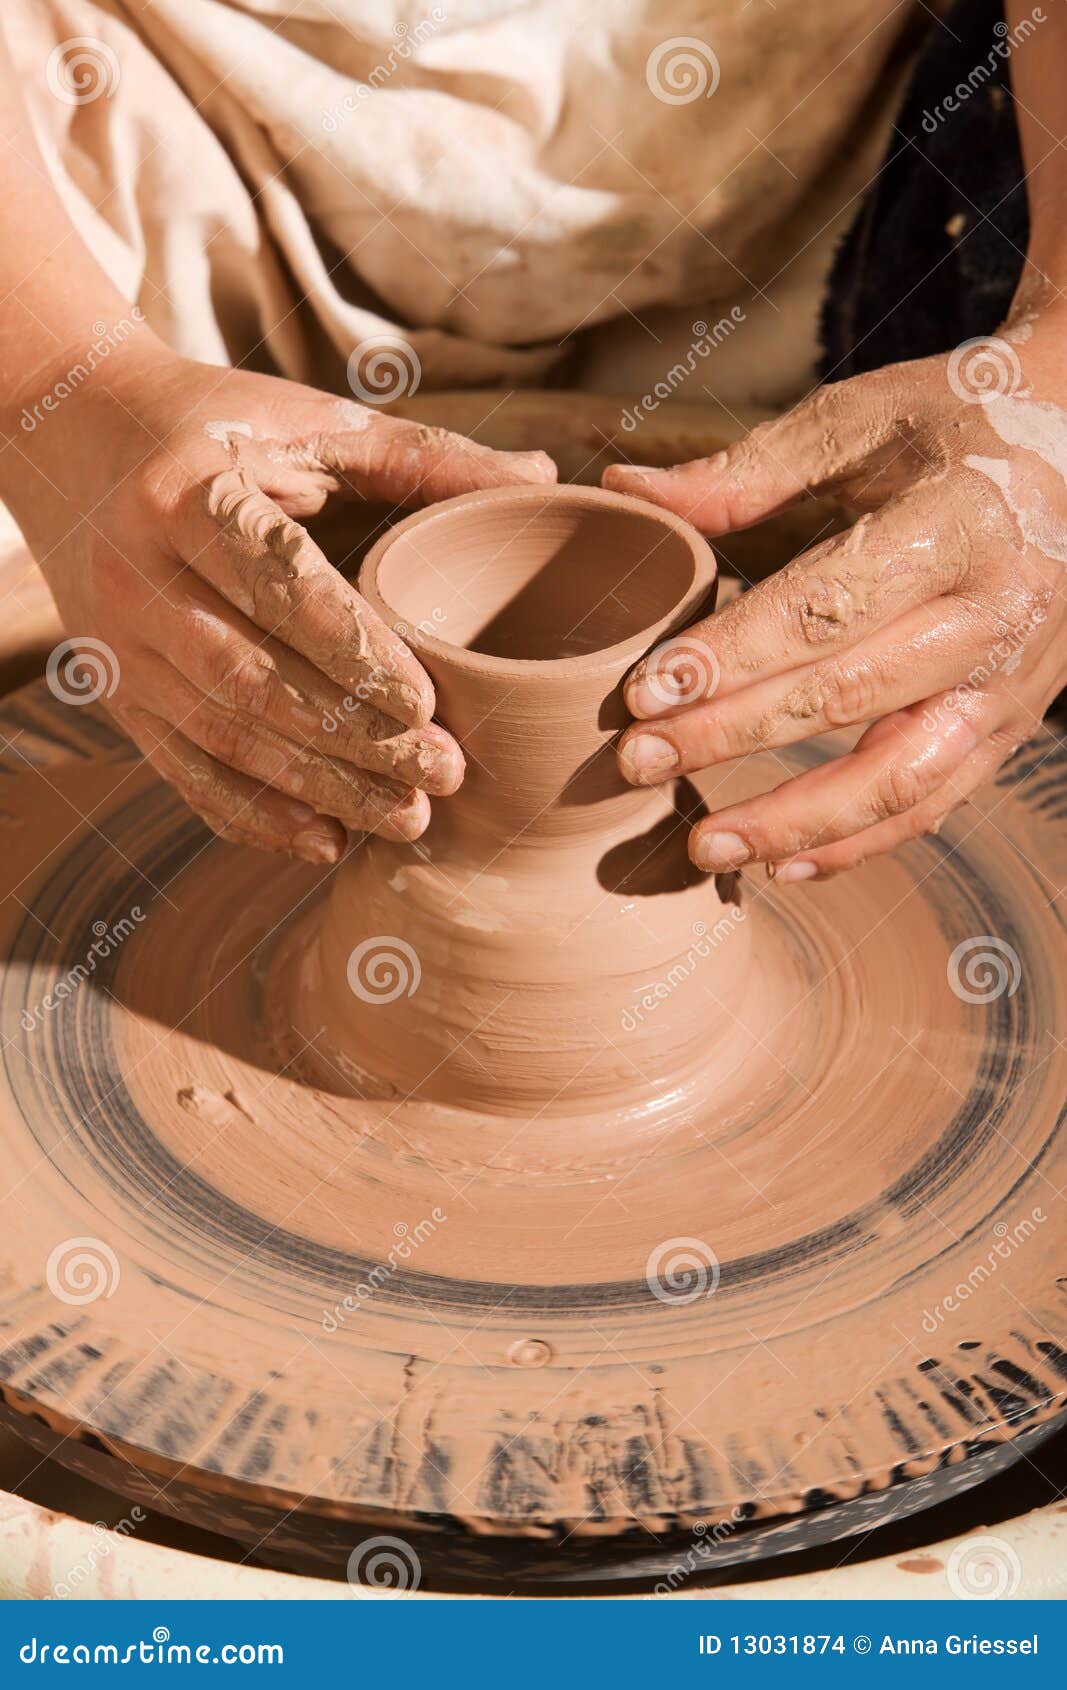 potter shaping clay